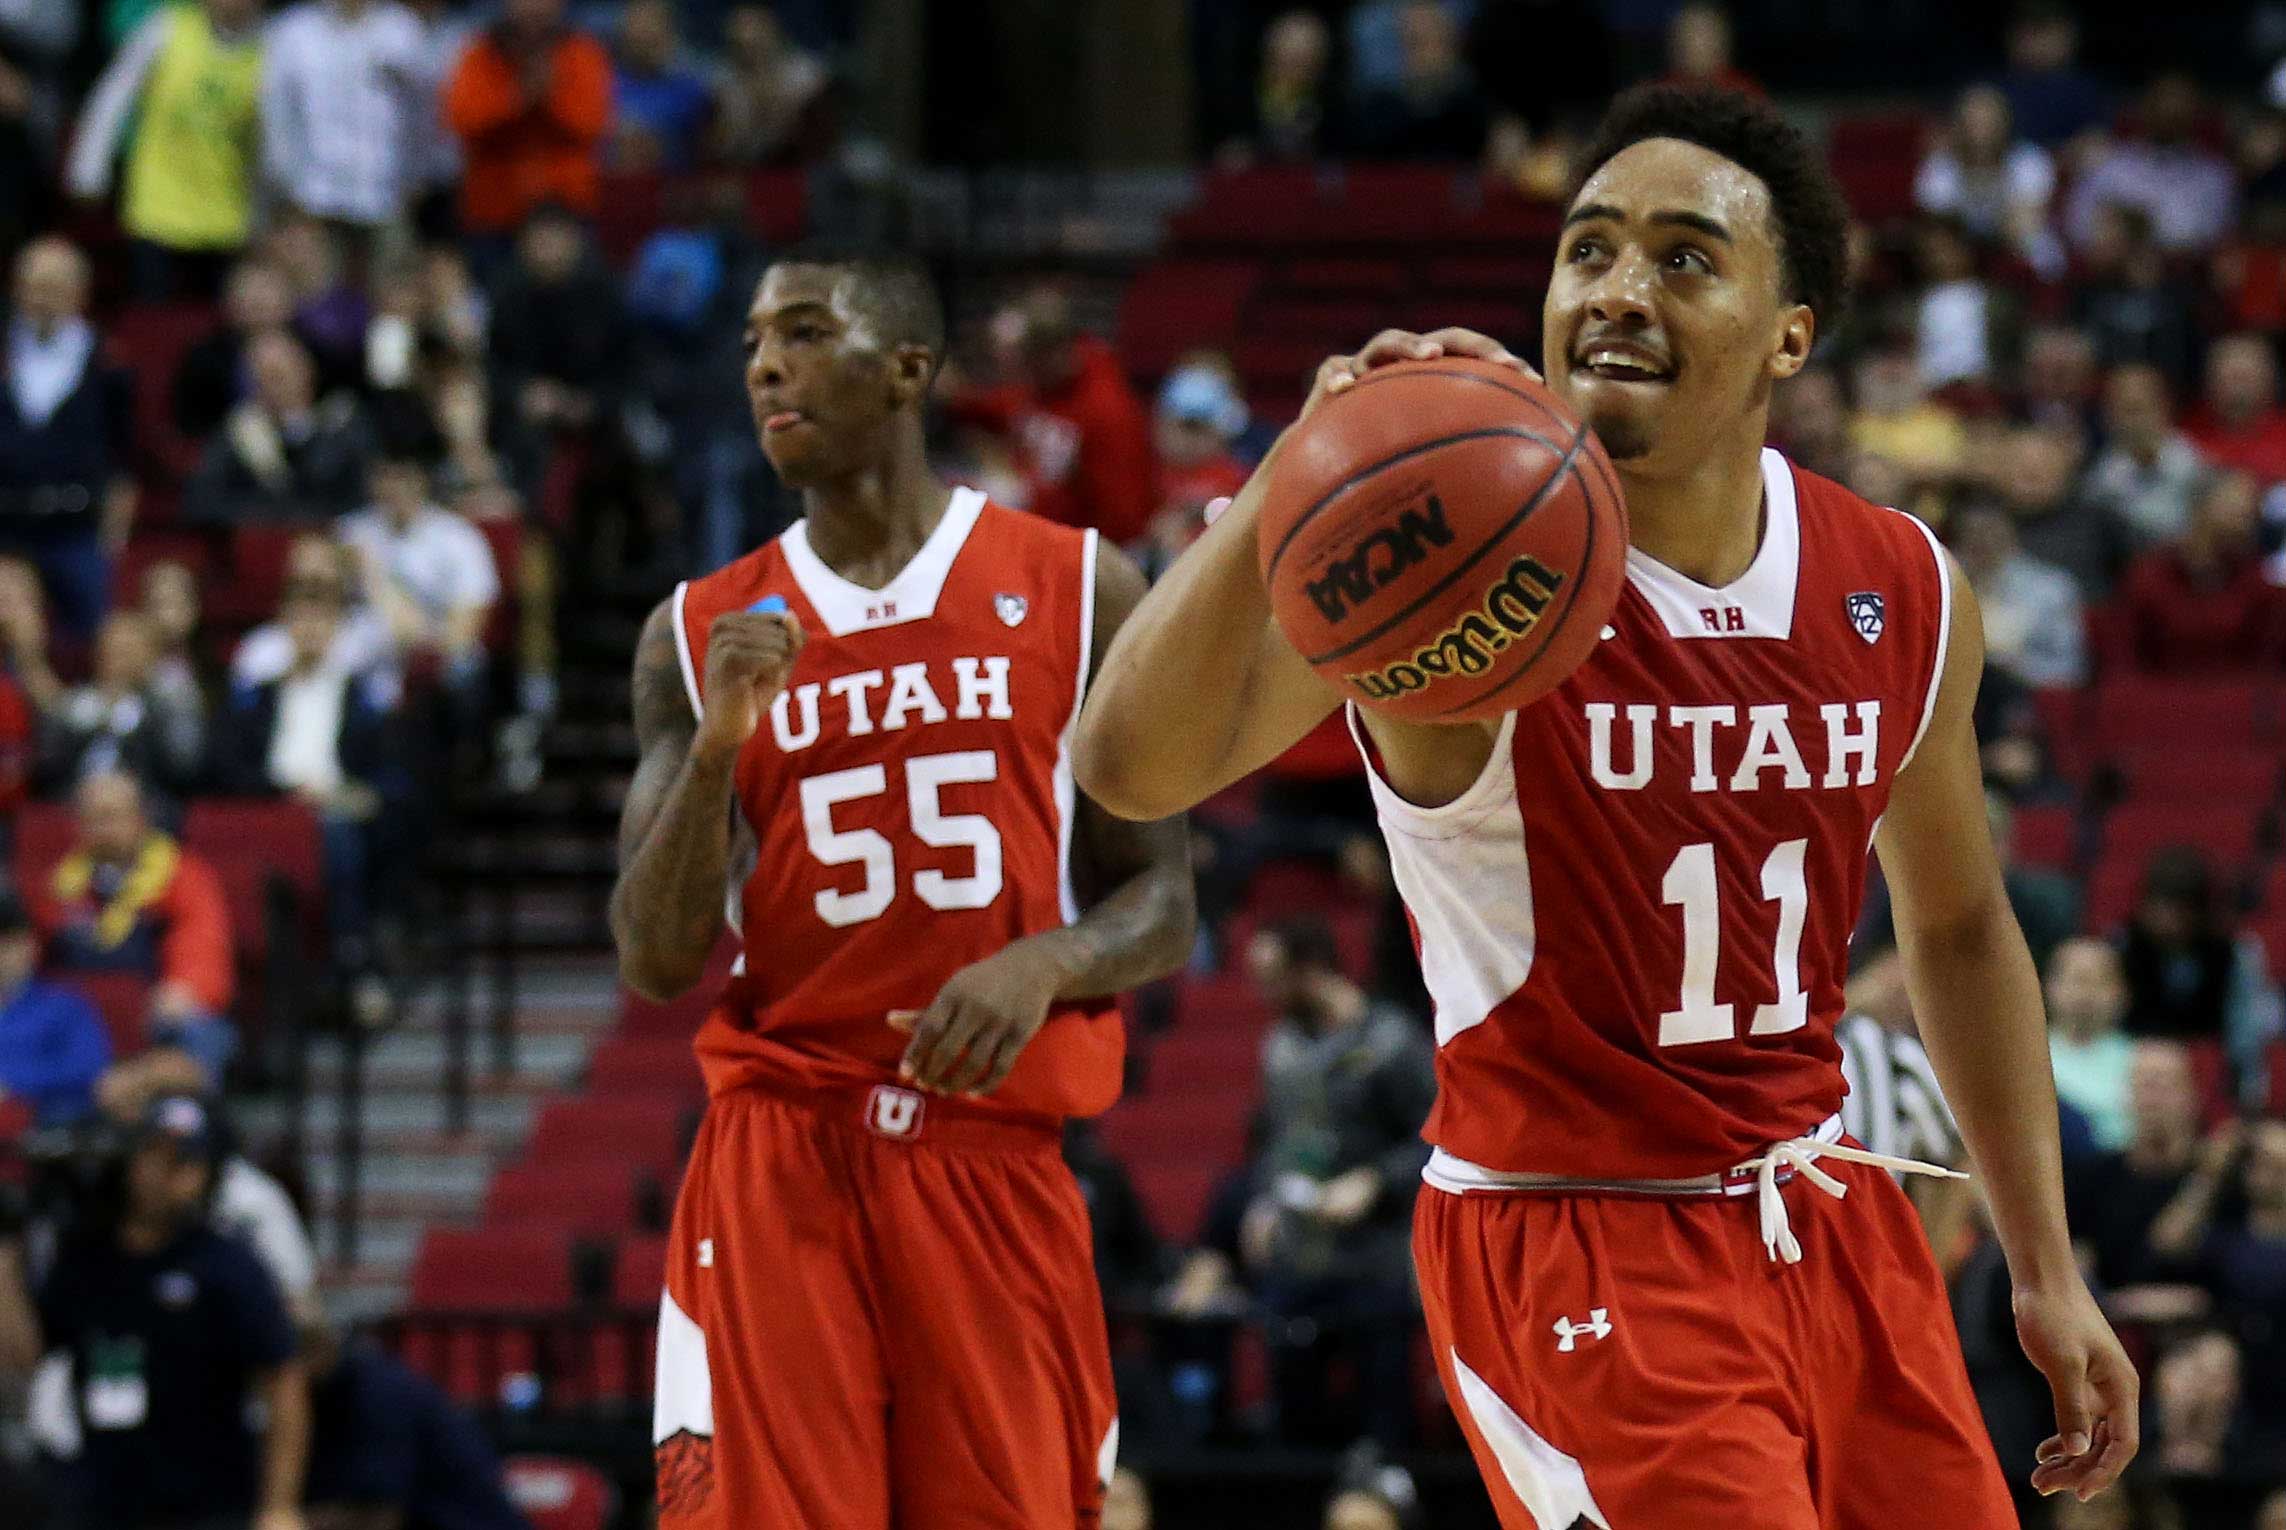 Brandon Taylor of the Utah Utes reacts in the second half against the Georgetown Hoyas during the third round of the 2015 NCAA Men's Basketball Tournament at Moda Center in Portland, Ore. March 21, 2015.